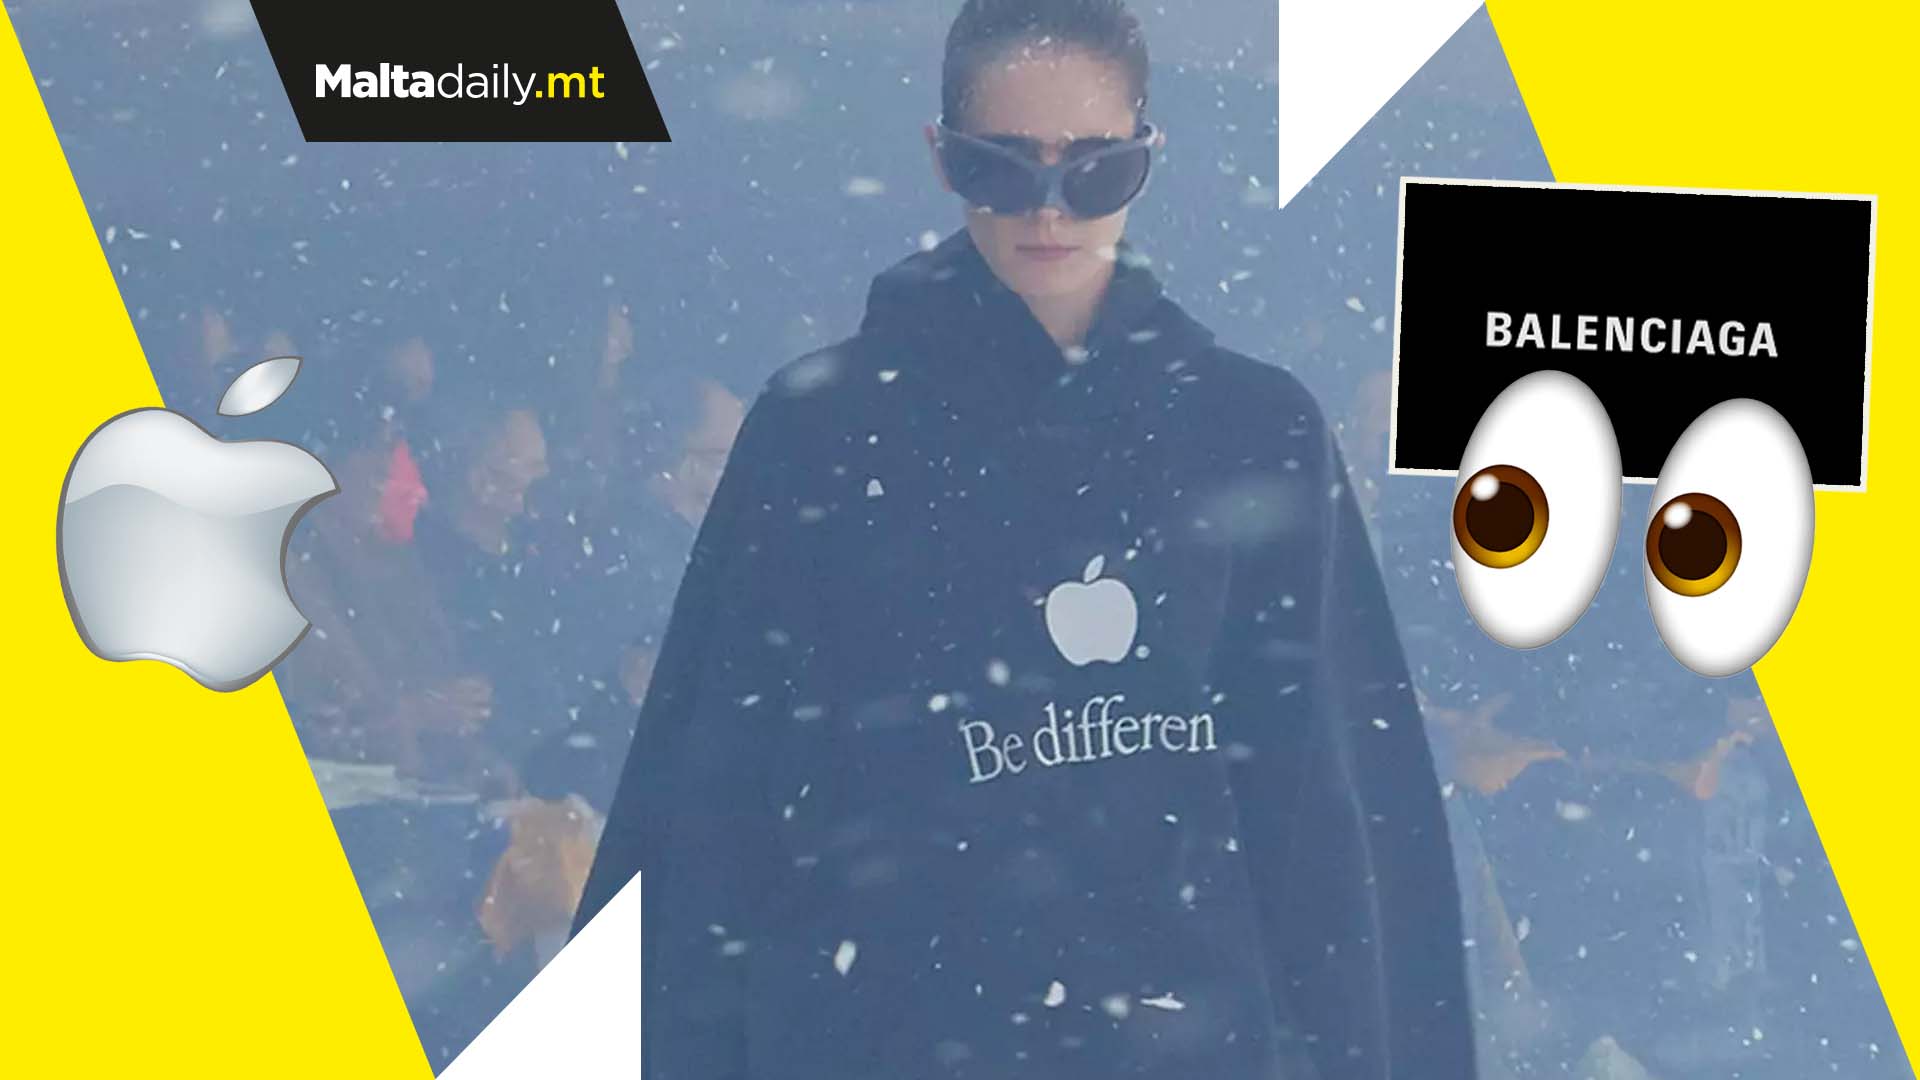 eftertiden stang fordel Are Balenciaga and Apple officially collaborating?